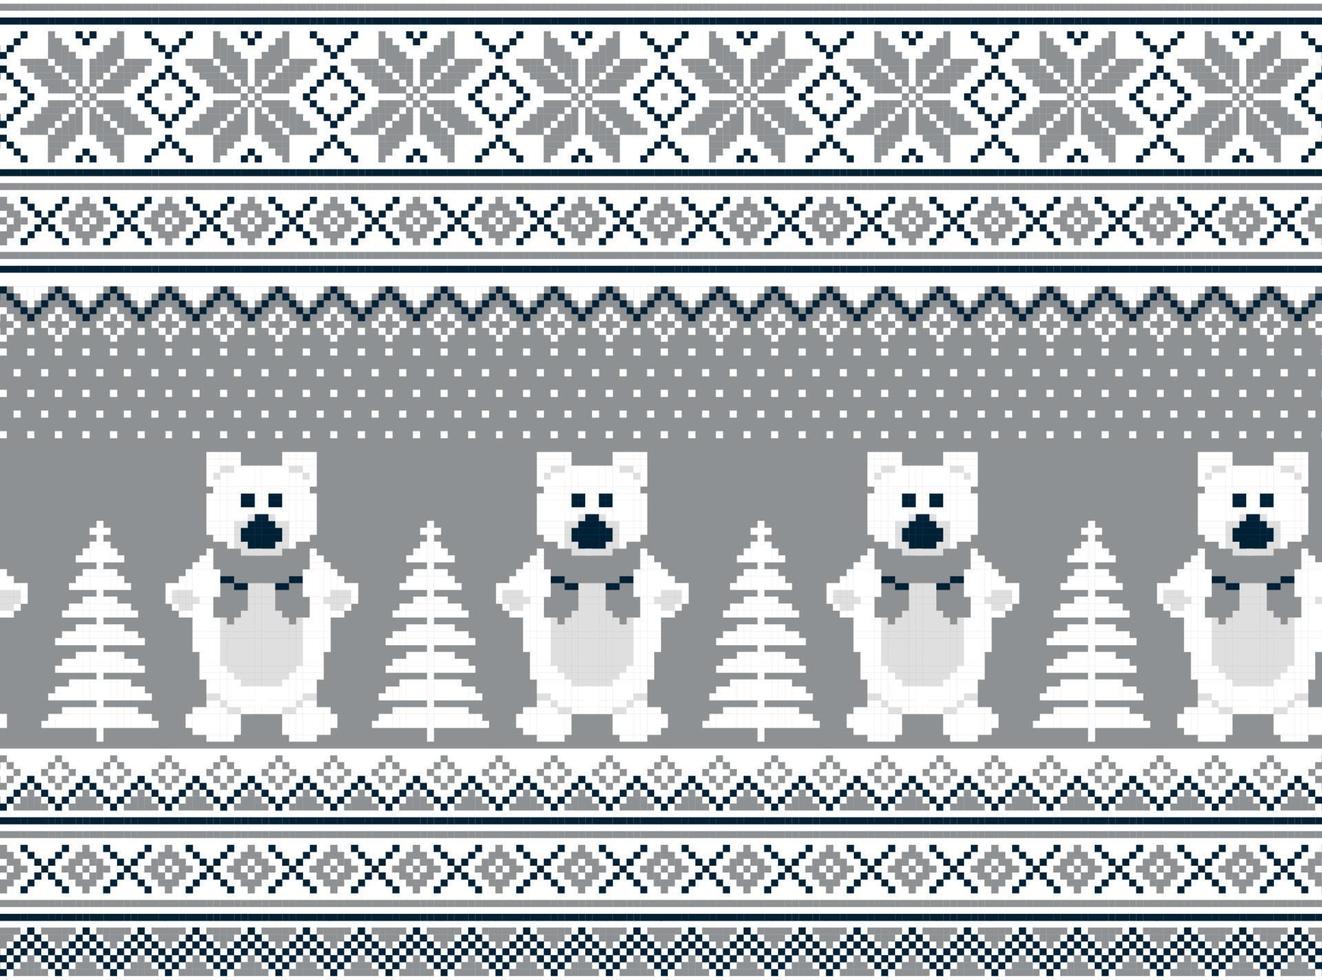 New Year's Christmas pattern pixel in bears vector illustration